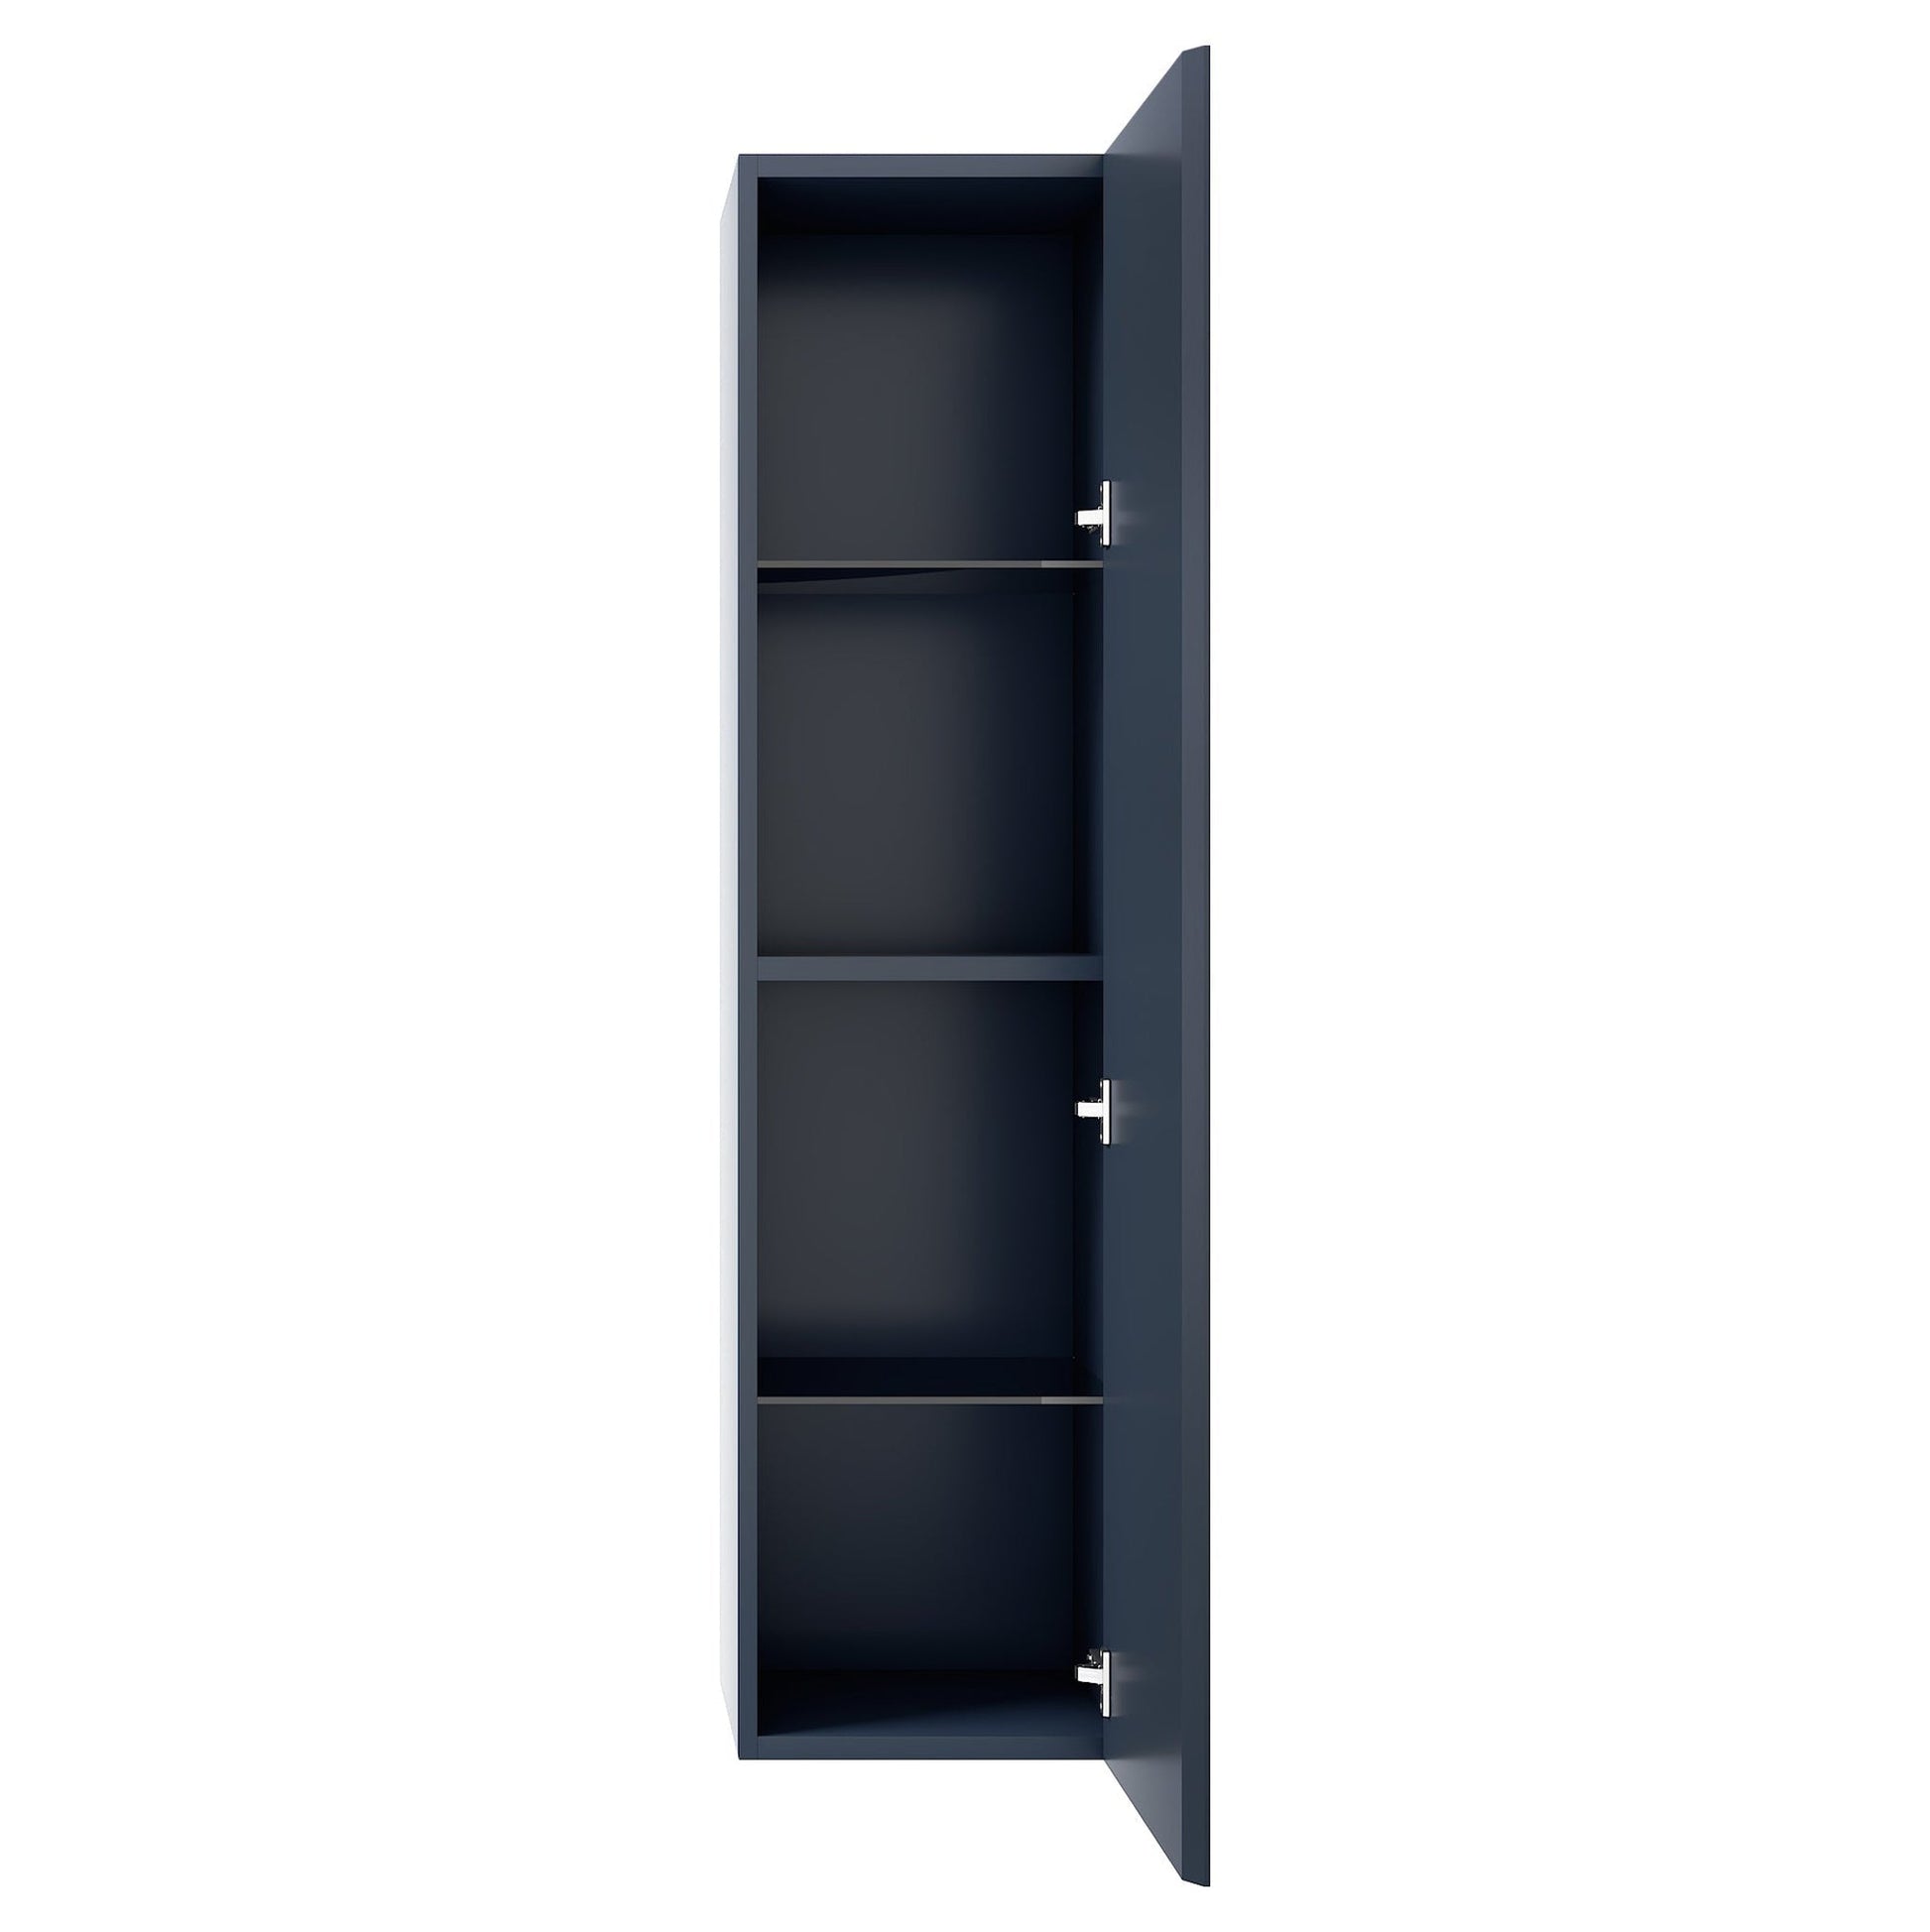 Blossom Positano 12" x 10" x 48" 1-Door Night Blue Wall-Mounted Side Cabinet With 1 Fixed Wood Shelve and 2 Adjustable Glass Shelves